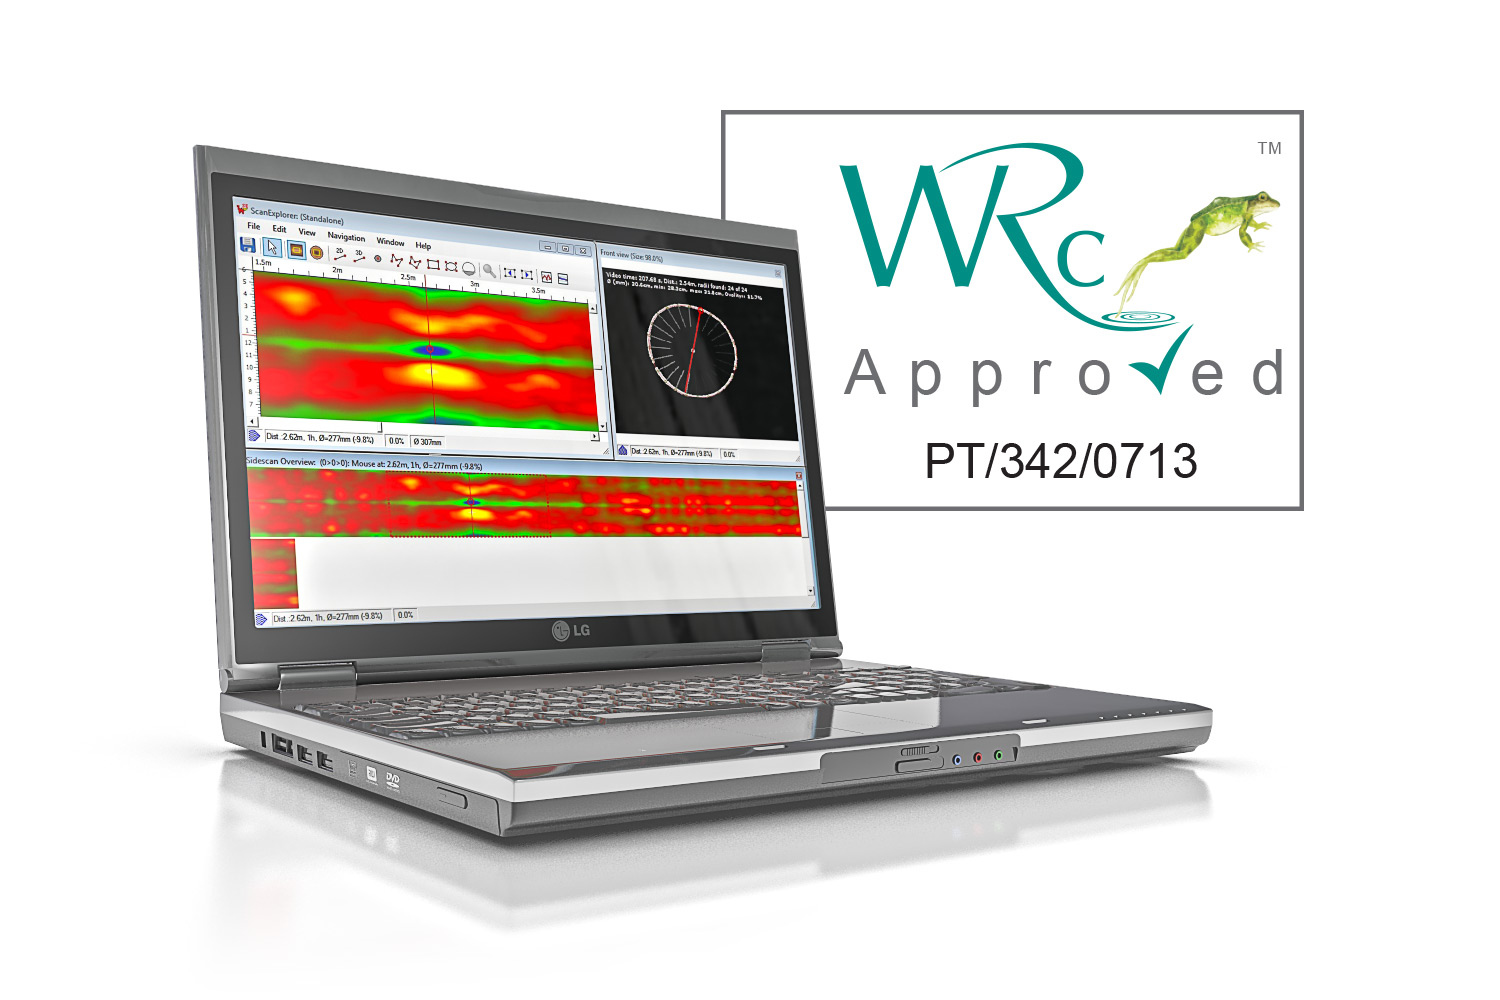 WinCan LaserScan software earns WRc Approved status.